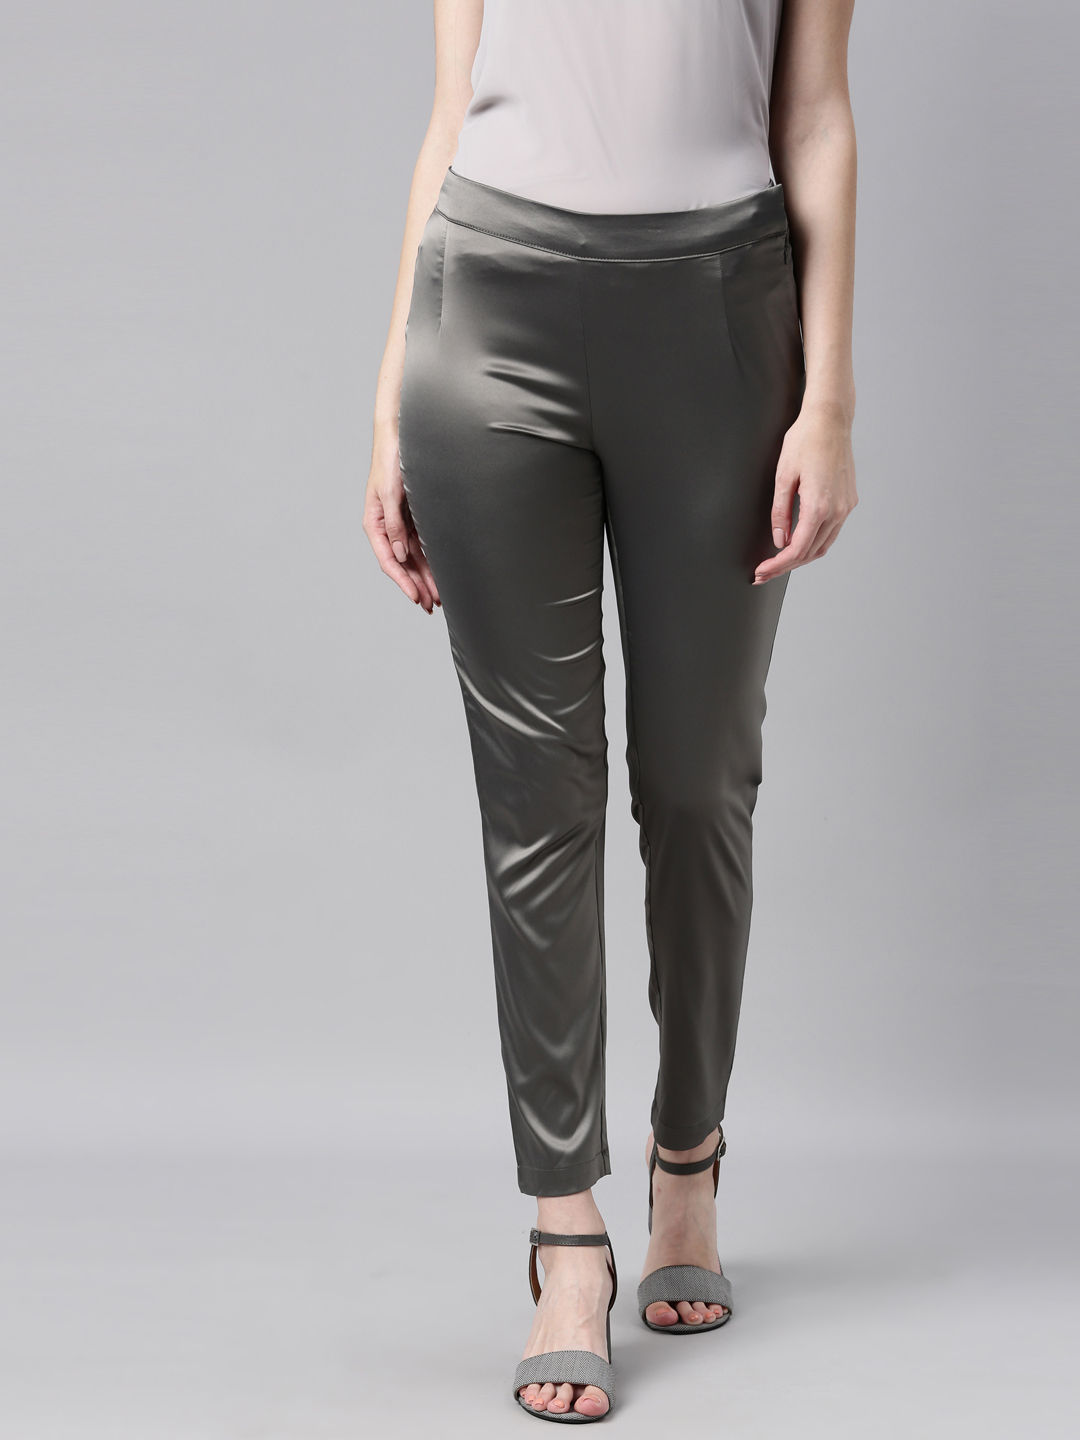 Ankle Length Pants For Women  Ankle Length Pants  SAINLY